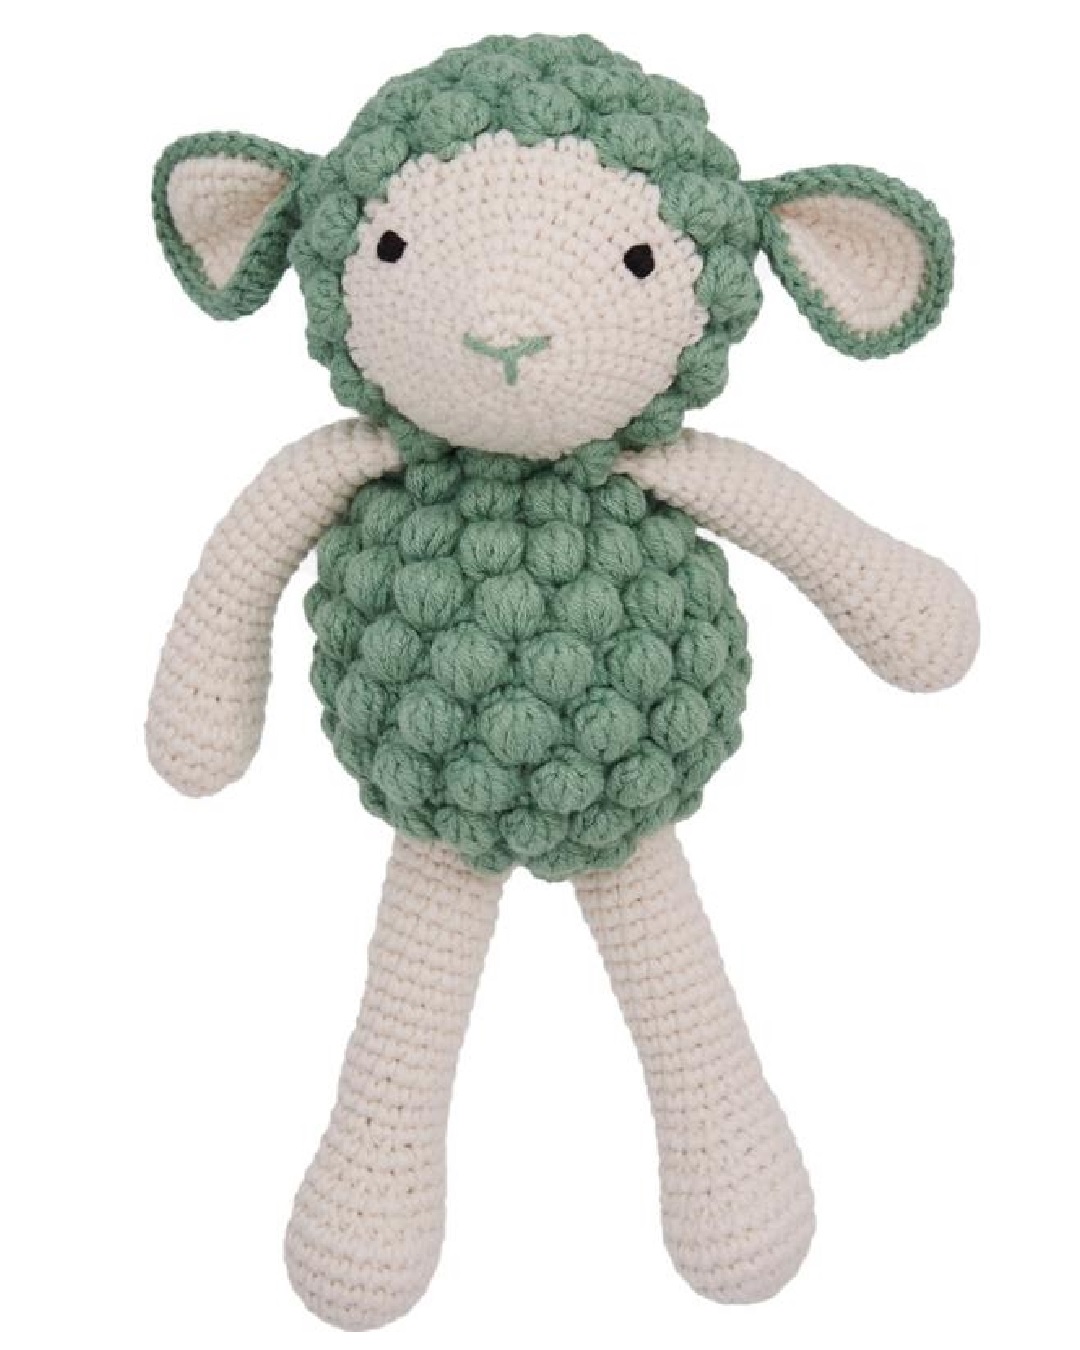 Crocheted sheep soft toy